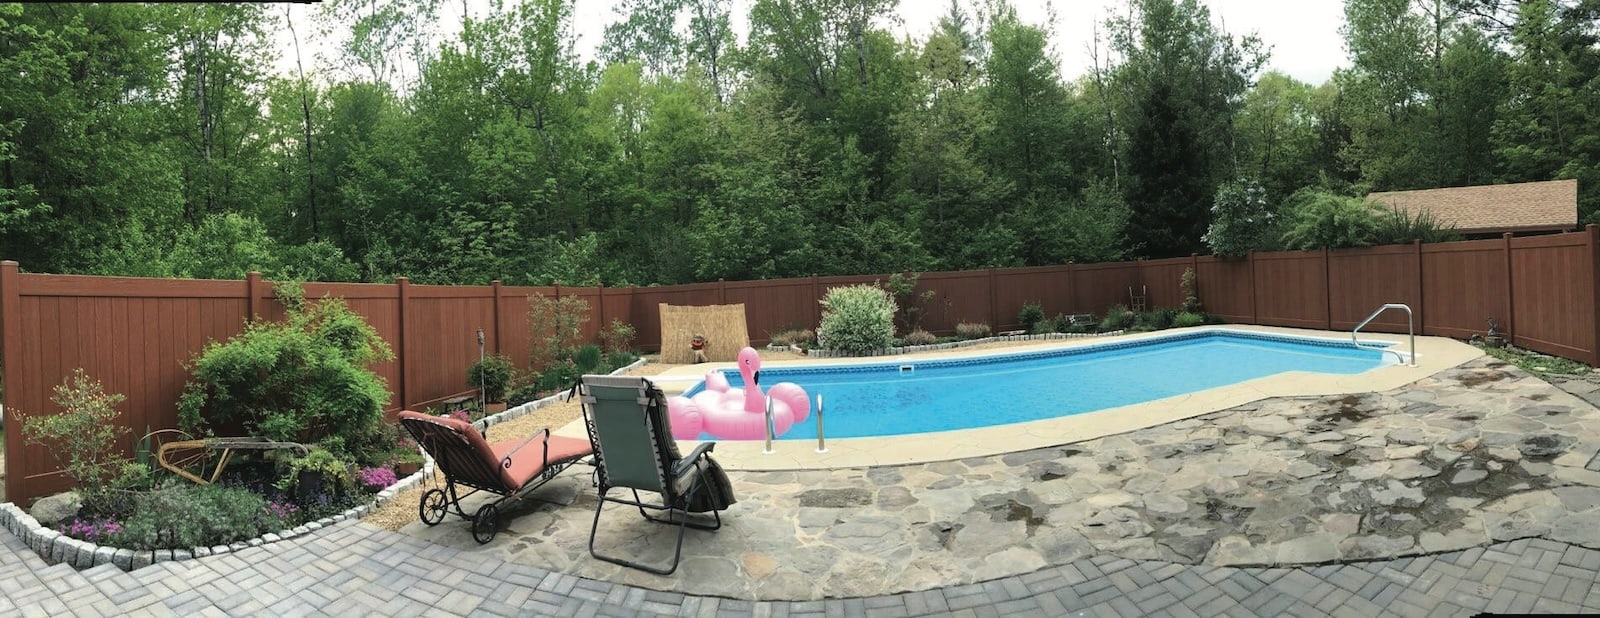 A pool surrounded by an ActiveYards fence